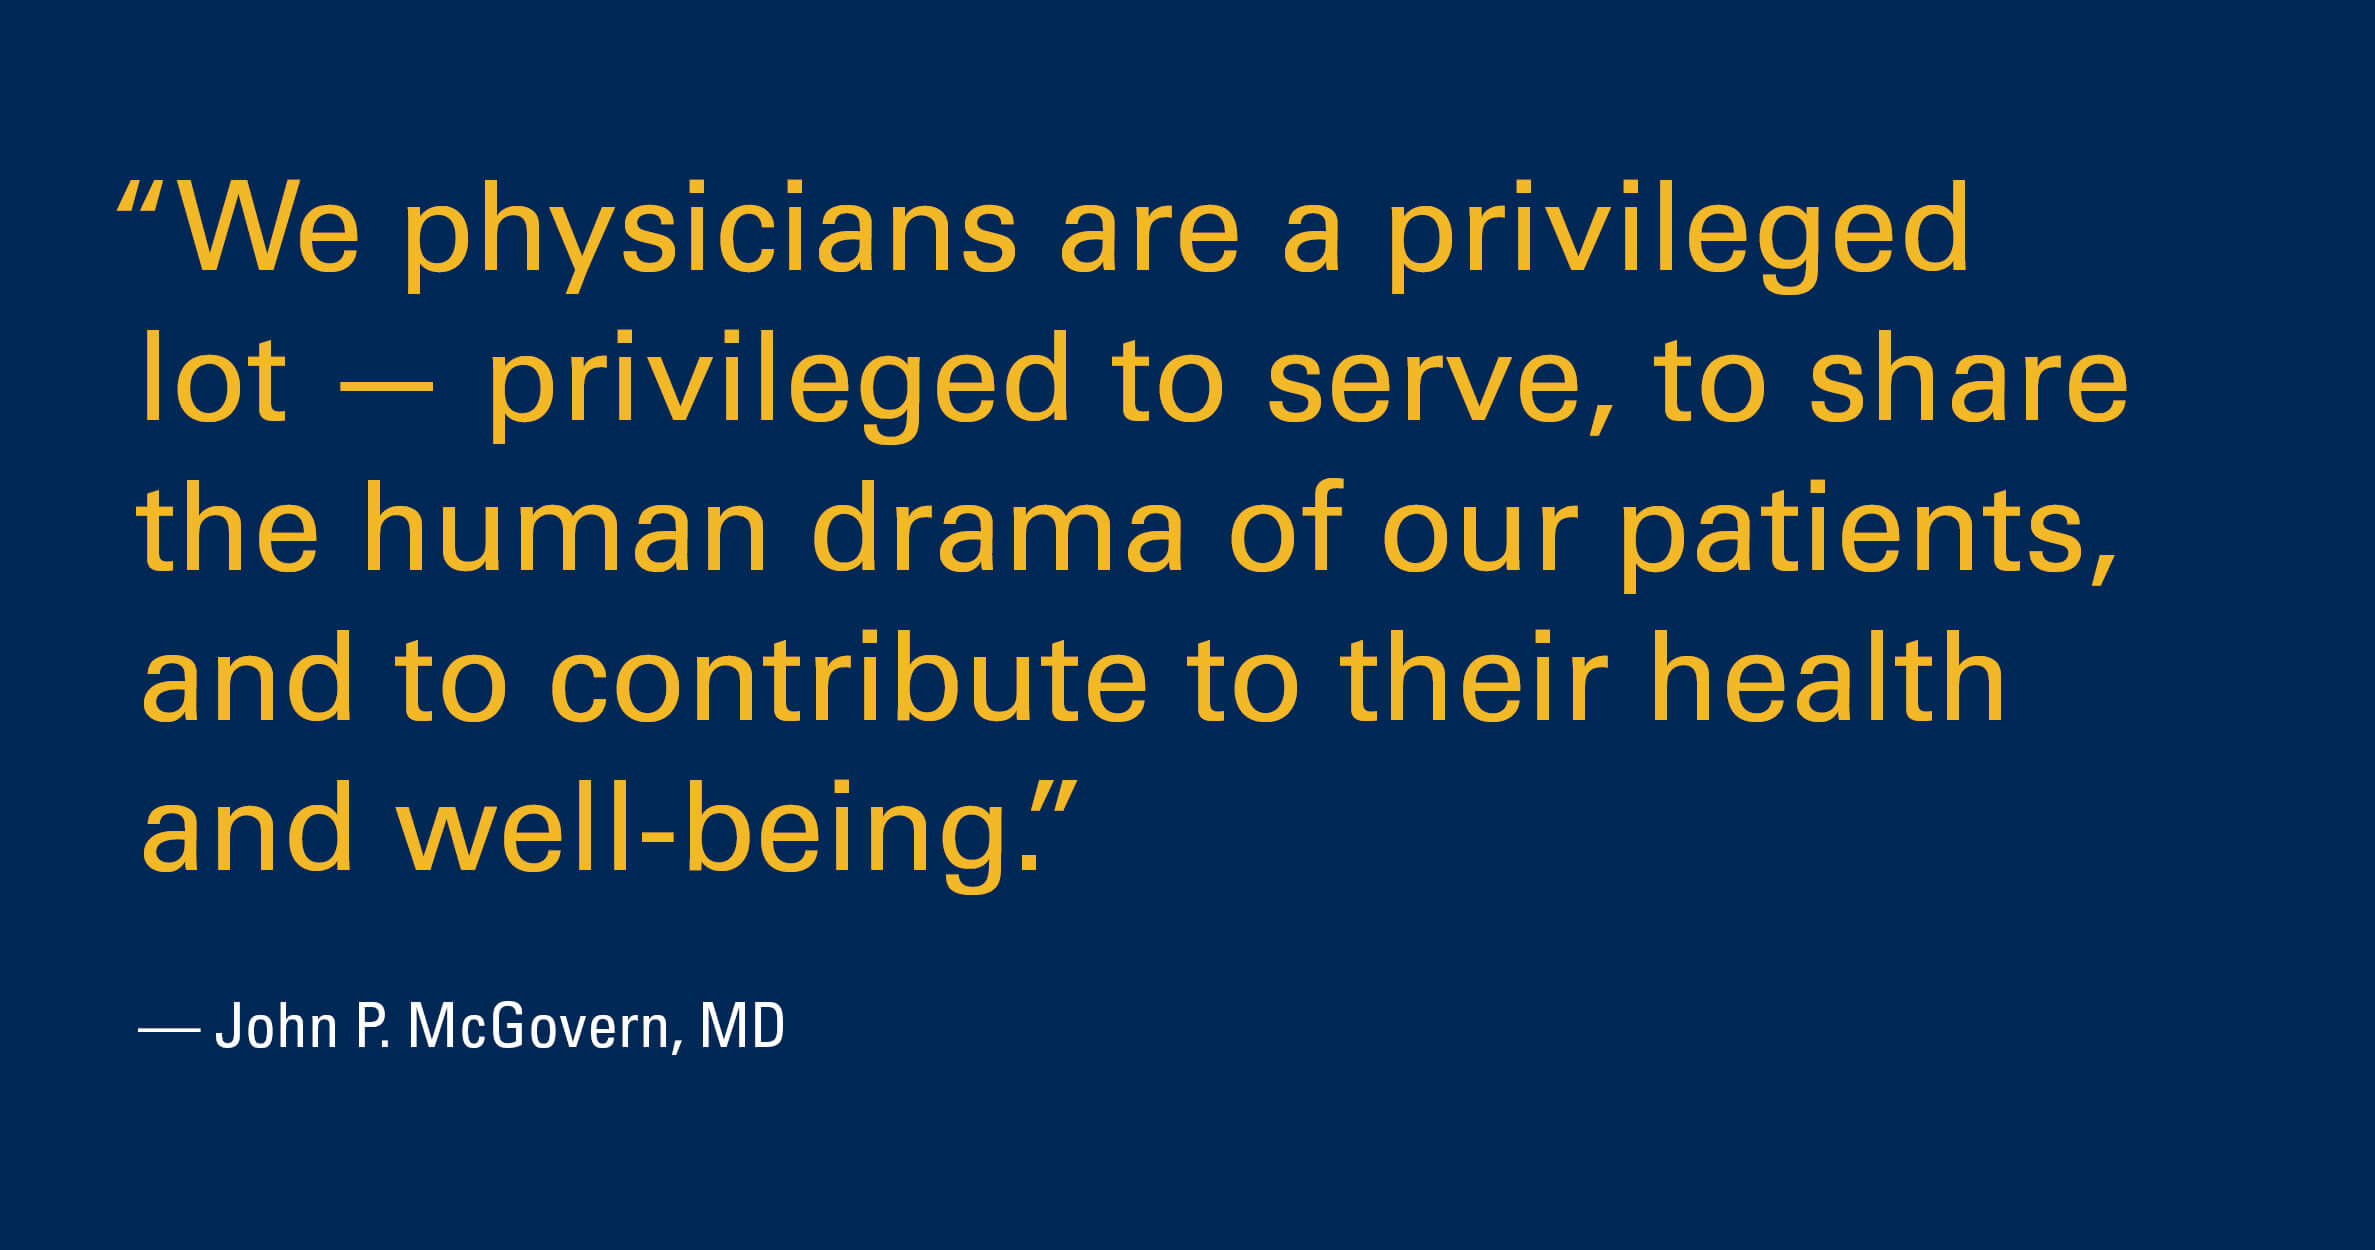 Quote by John P. McGovern, MD